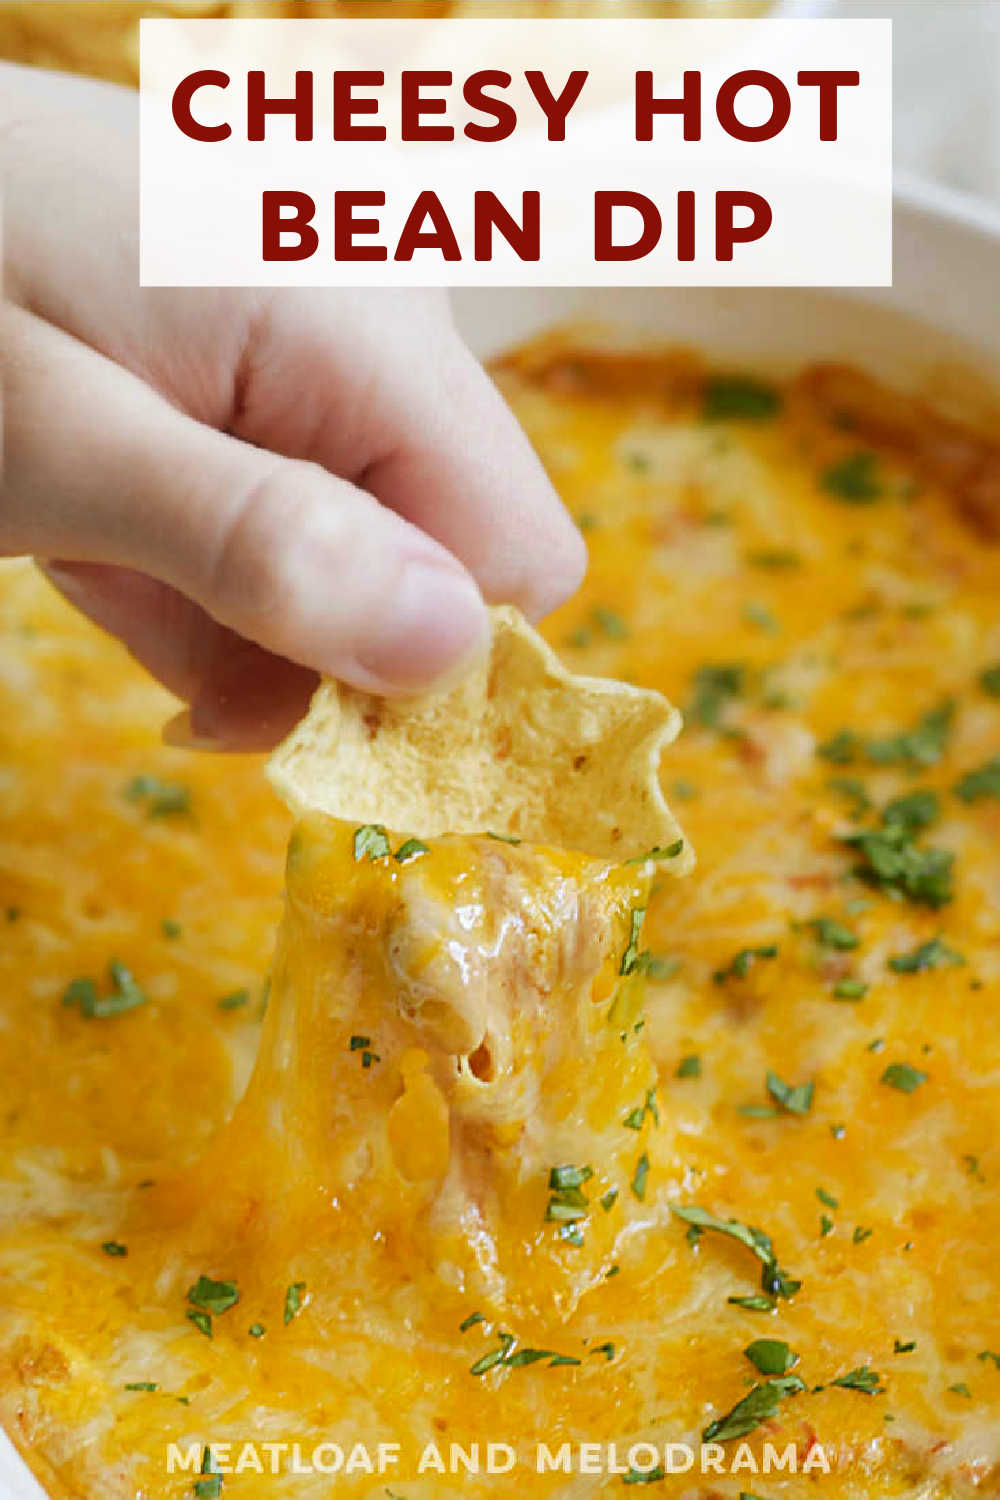 Cheesy Hot Bean Dip with cream cheese, refried beans, sour cream, salsa and lots of cheese is a delicious appetizer the whole family loves. This delicious dip is perfect for dipping tortilla chips and Fritos and a real crowd pleaser at game day parties. via @meamel